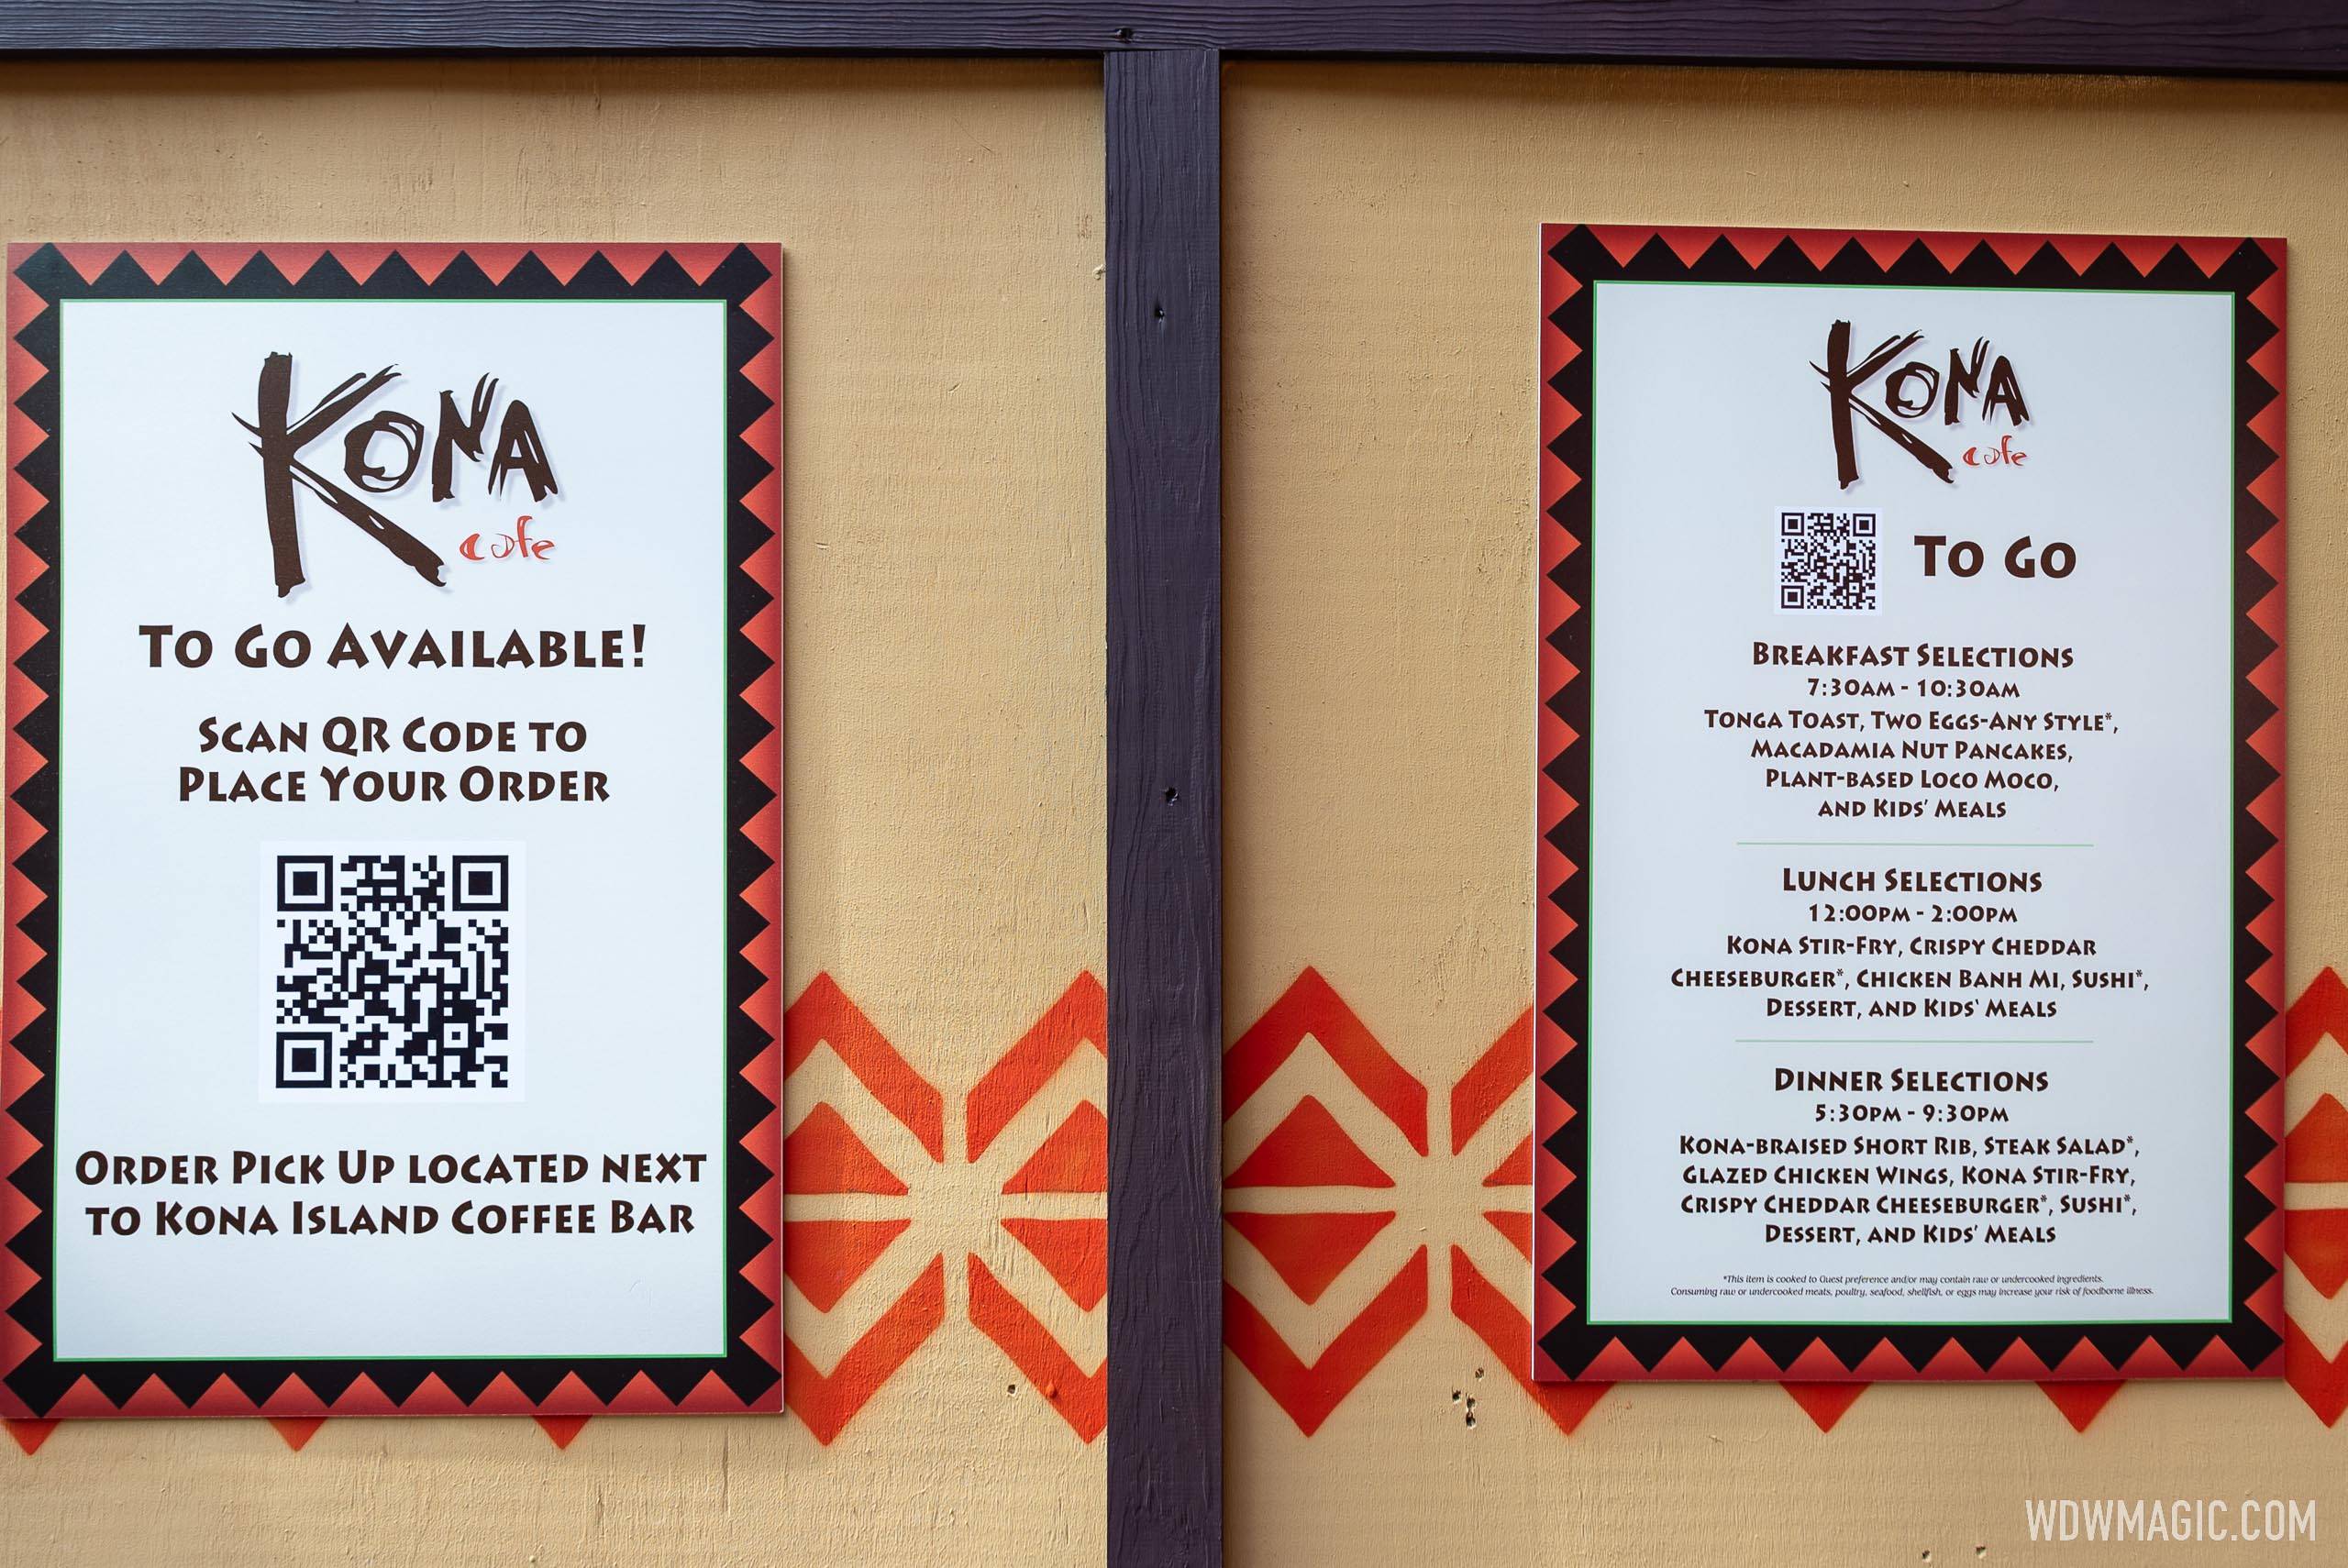 Tonga Toast and other fan favorites return to the new look Kona Cafe at Disney's Polynesian Village Resort